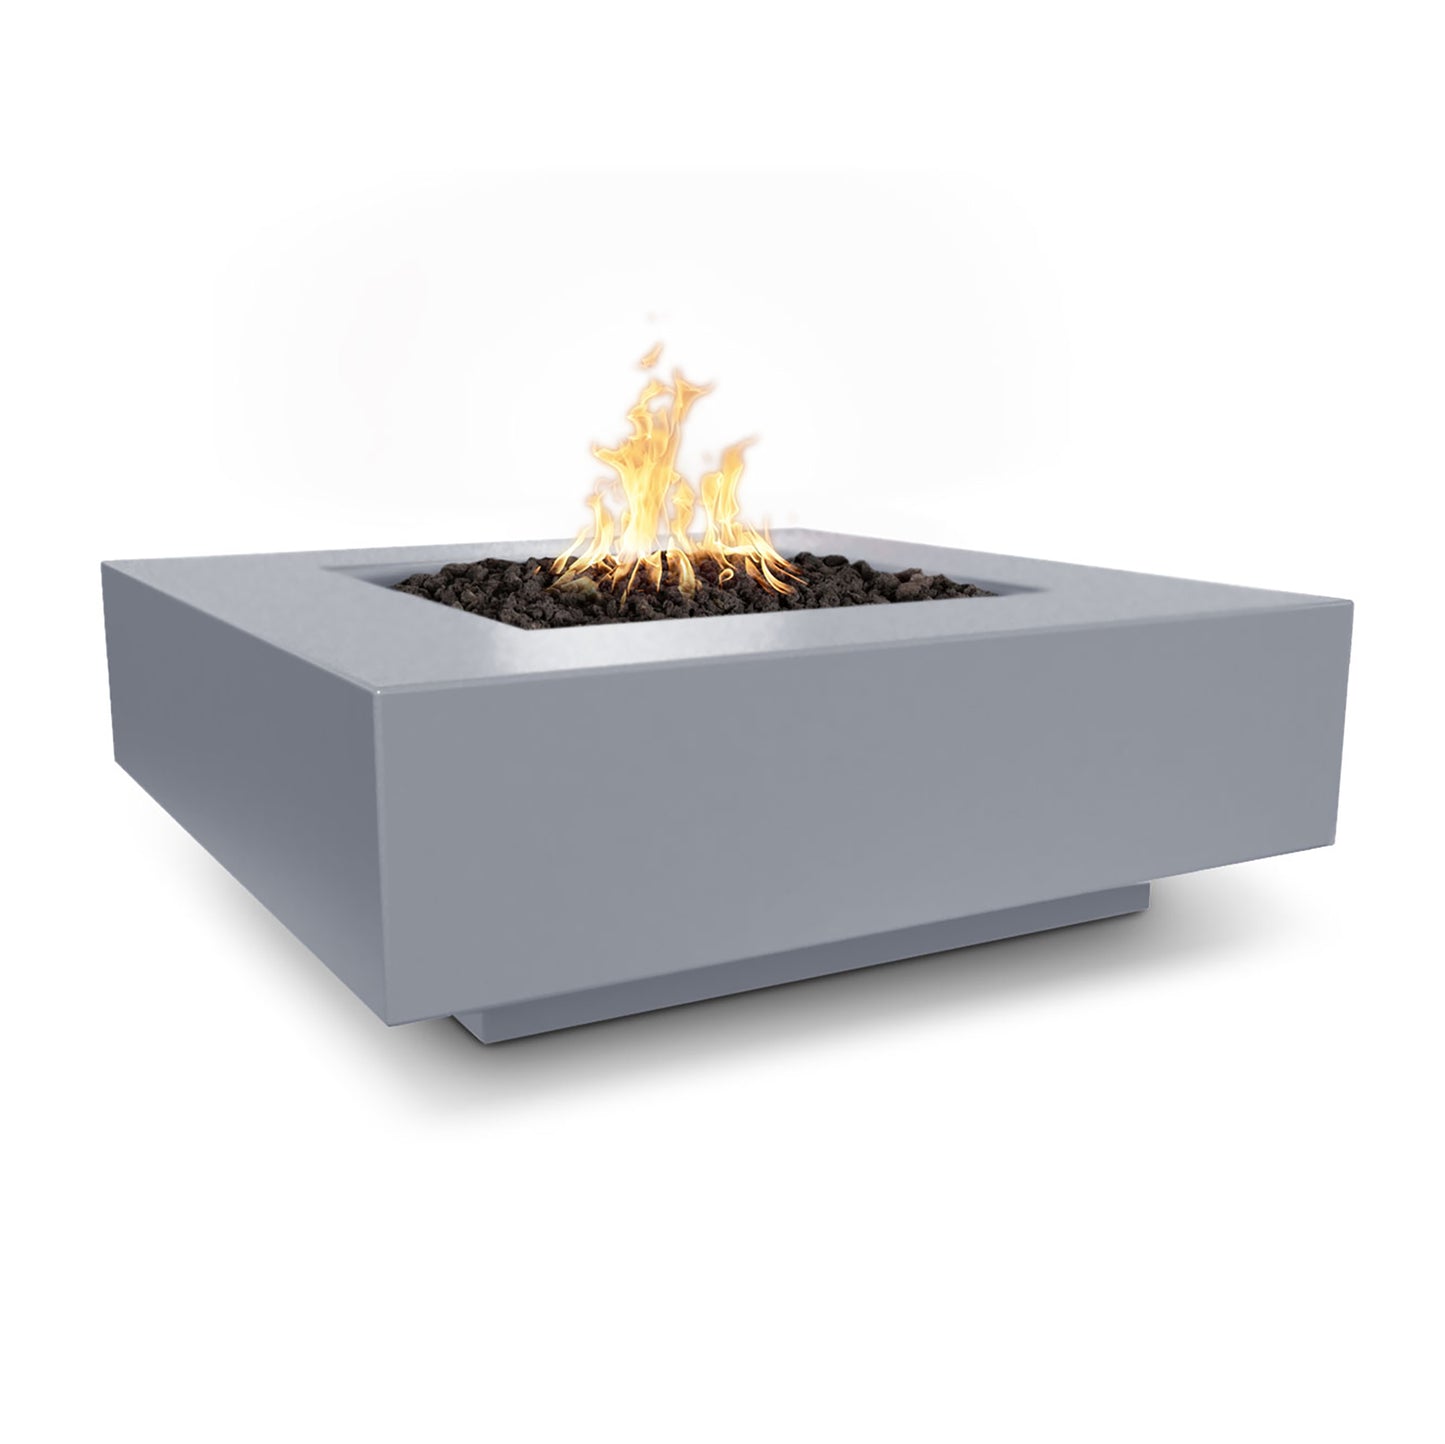 Cabo Square Concrete Fire Pit 48" - Electronic Ignition